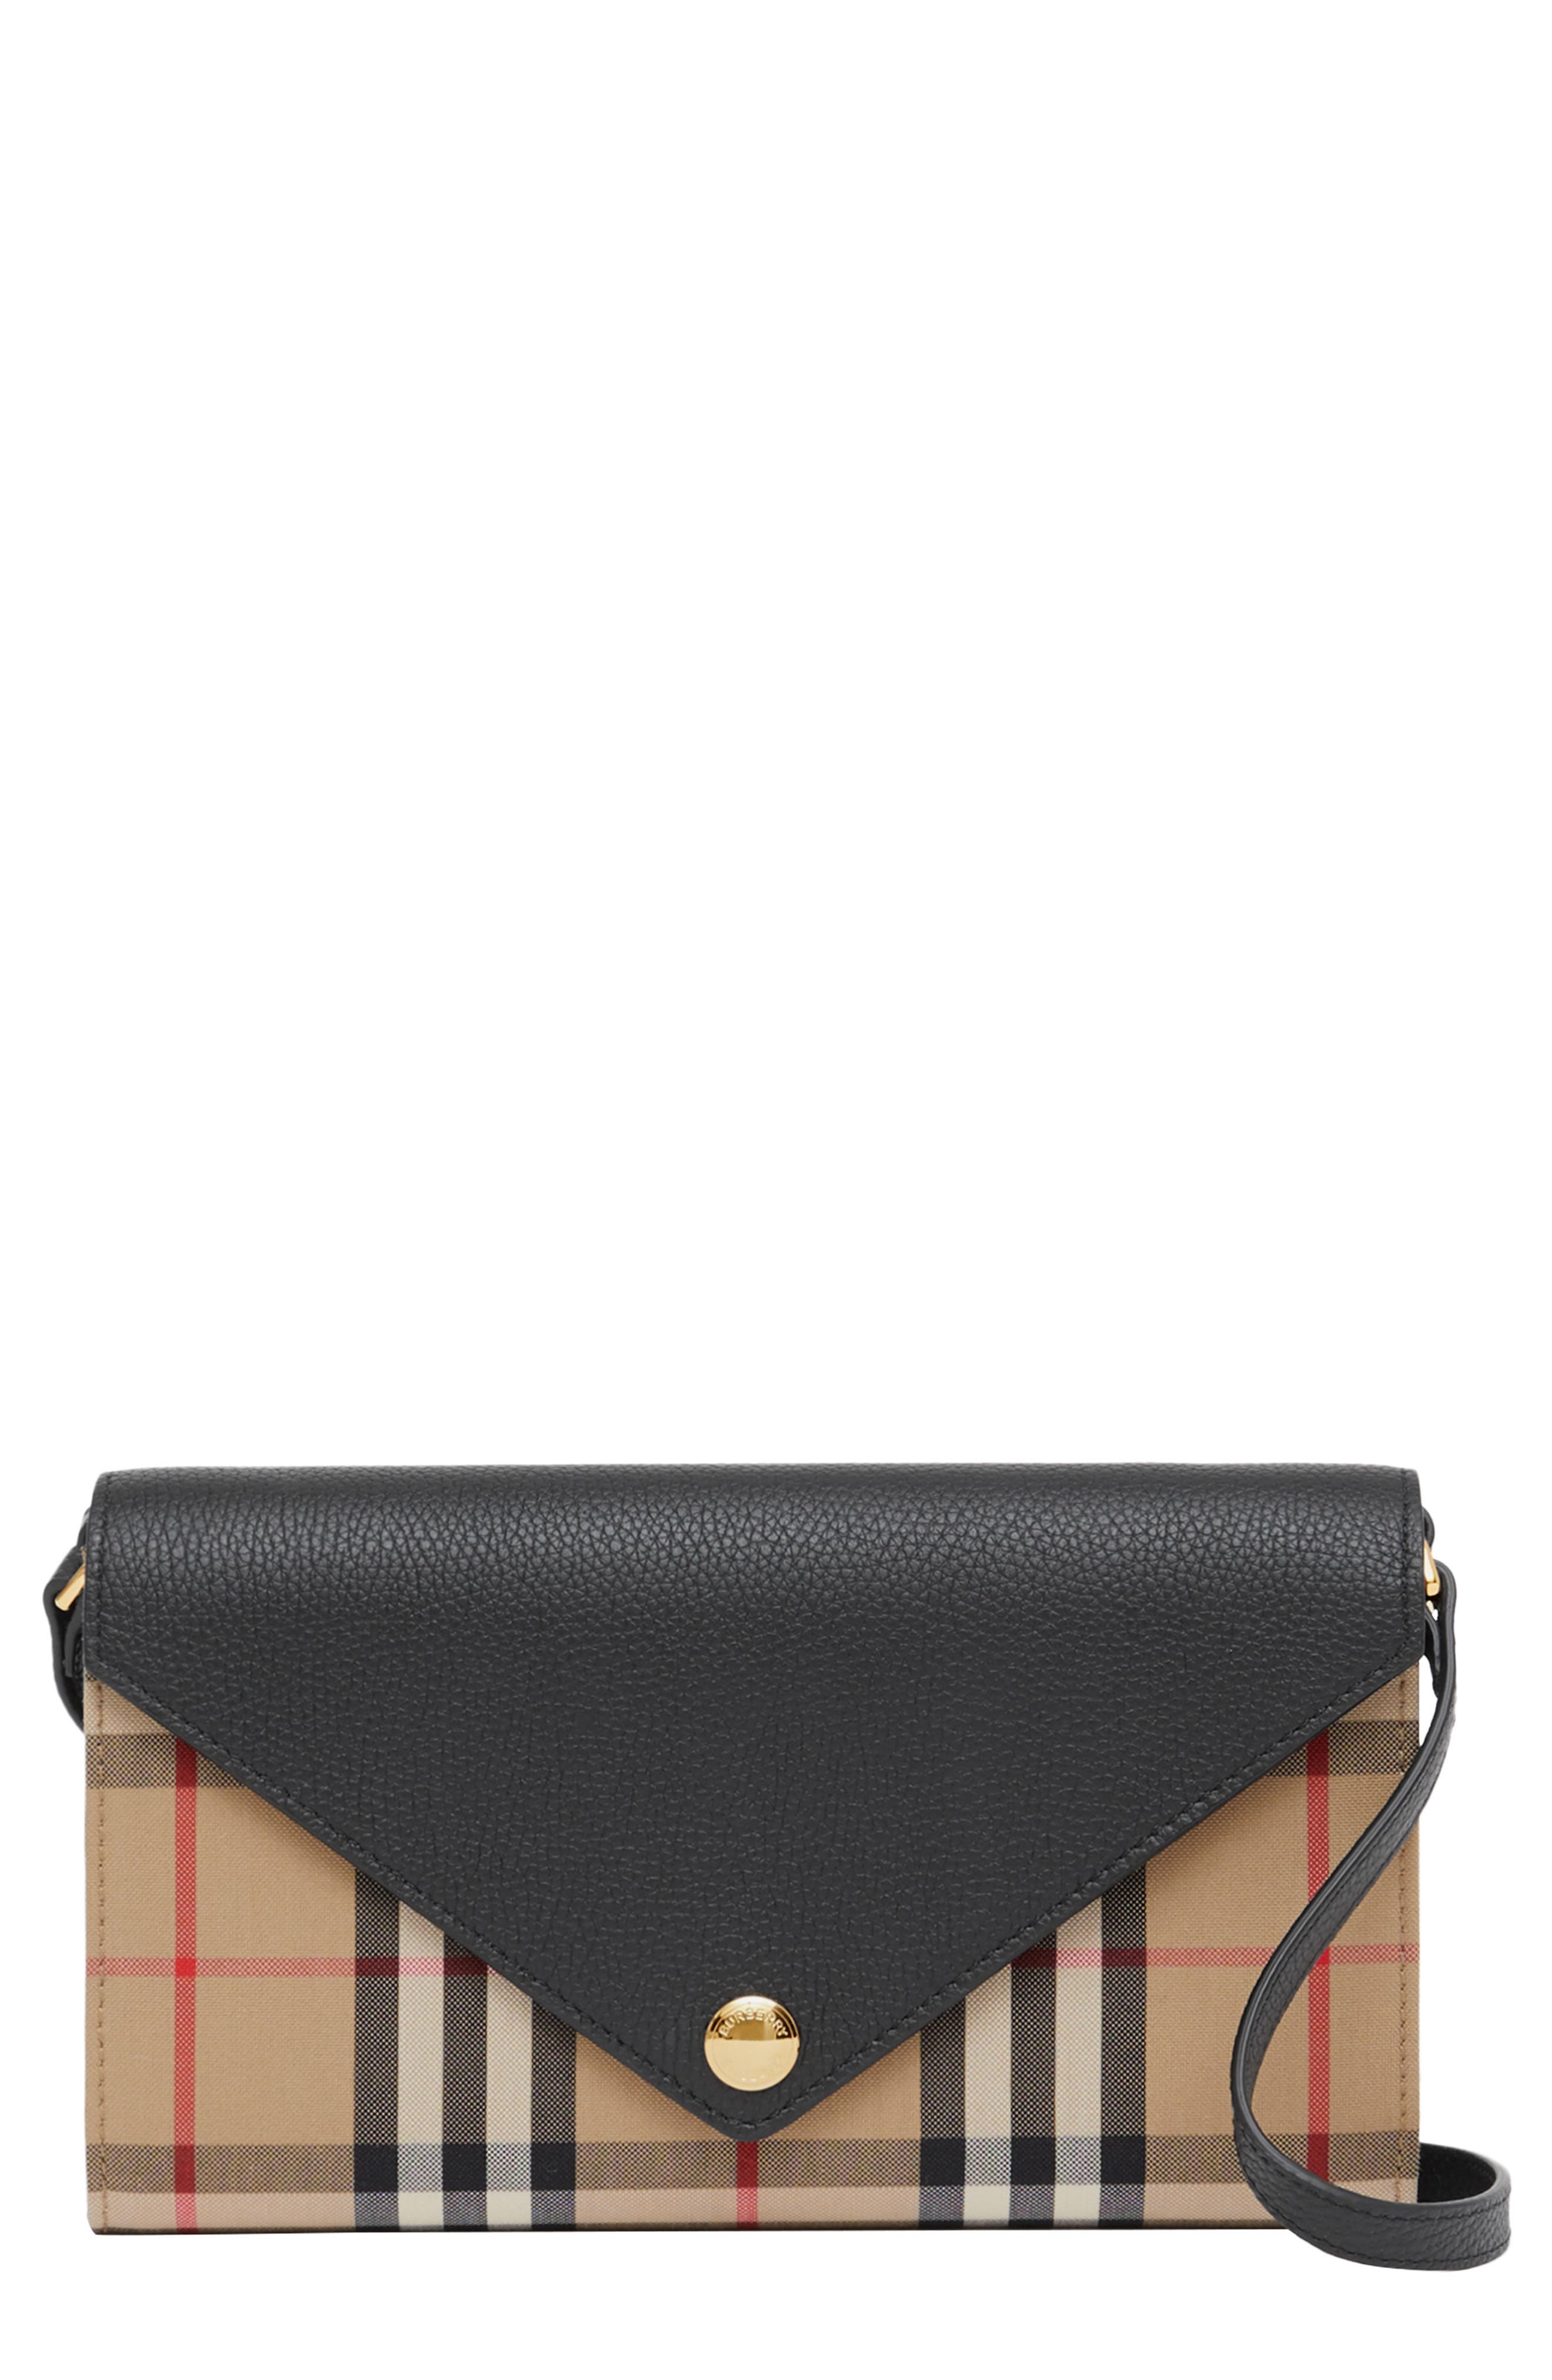 Burberry New Arrivals Accessories 